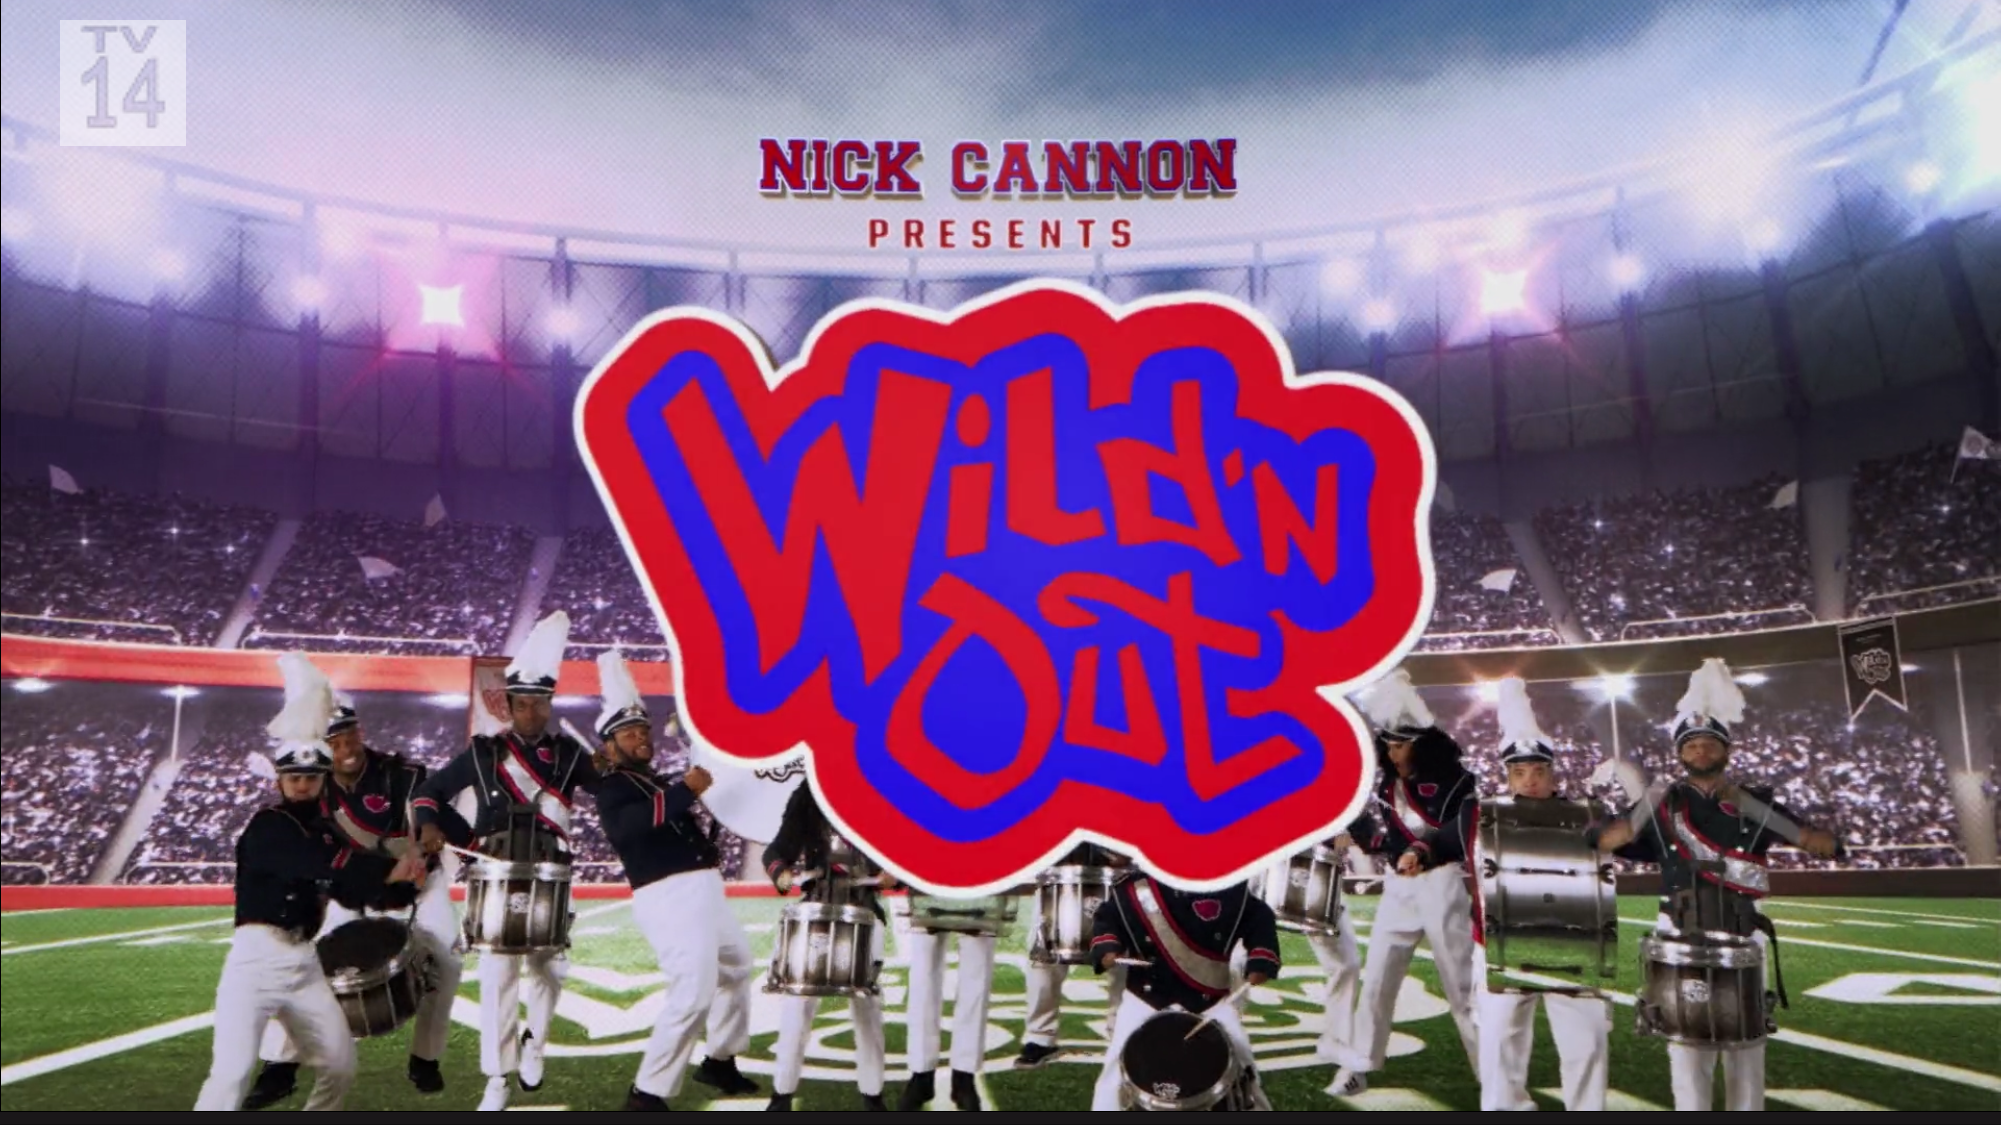 watch old wild n out season 8 episode 1